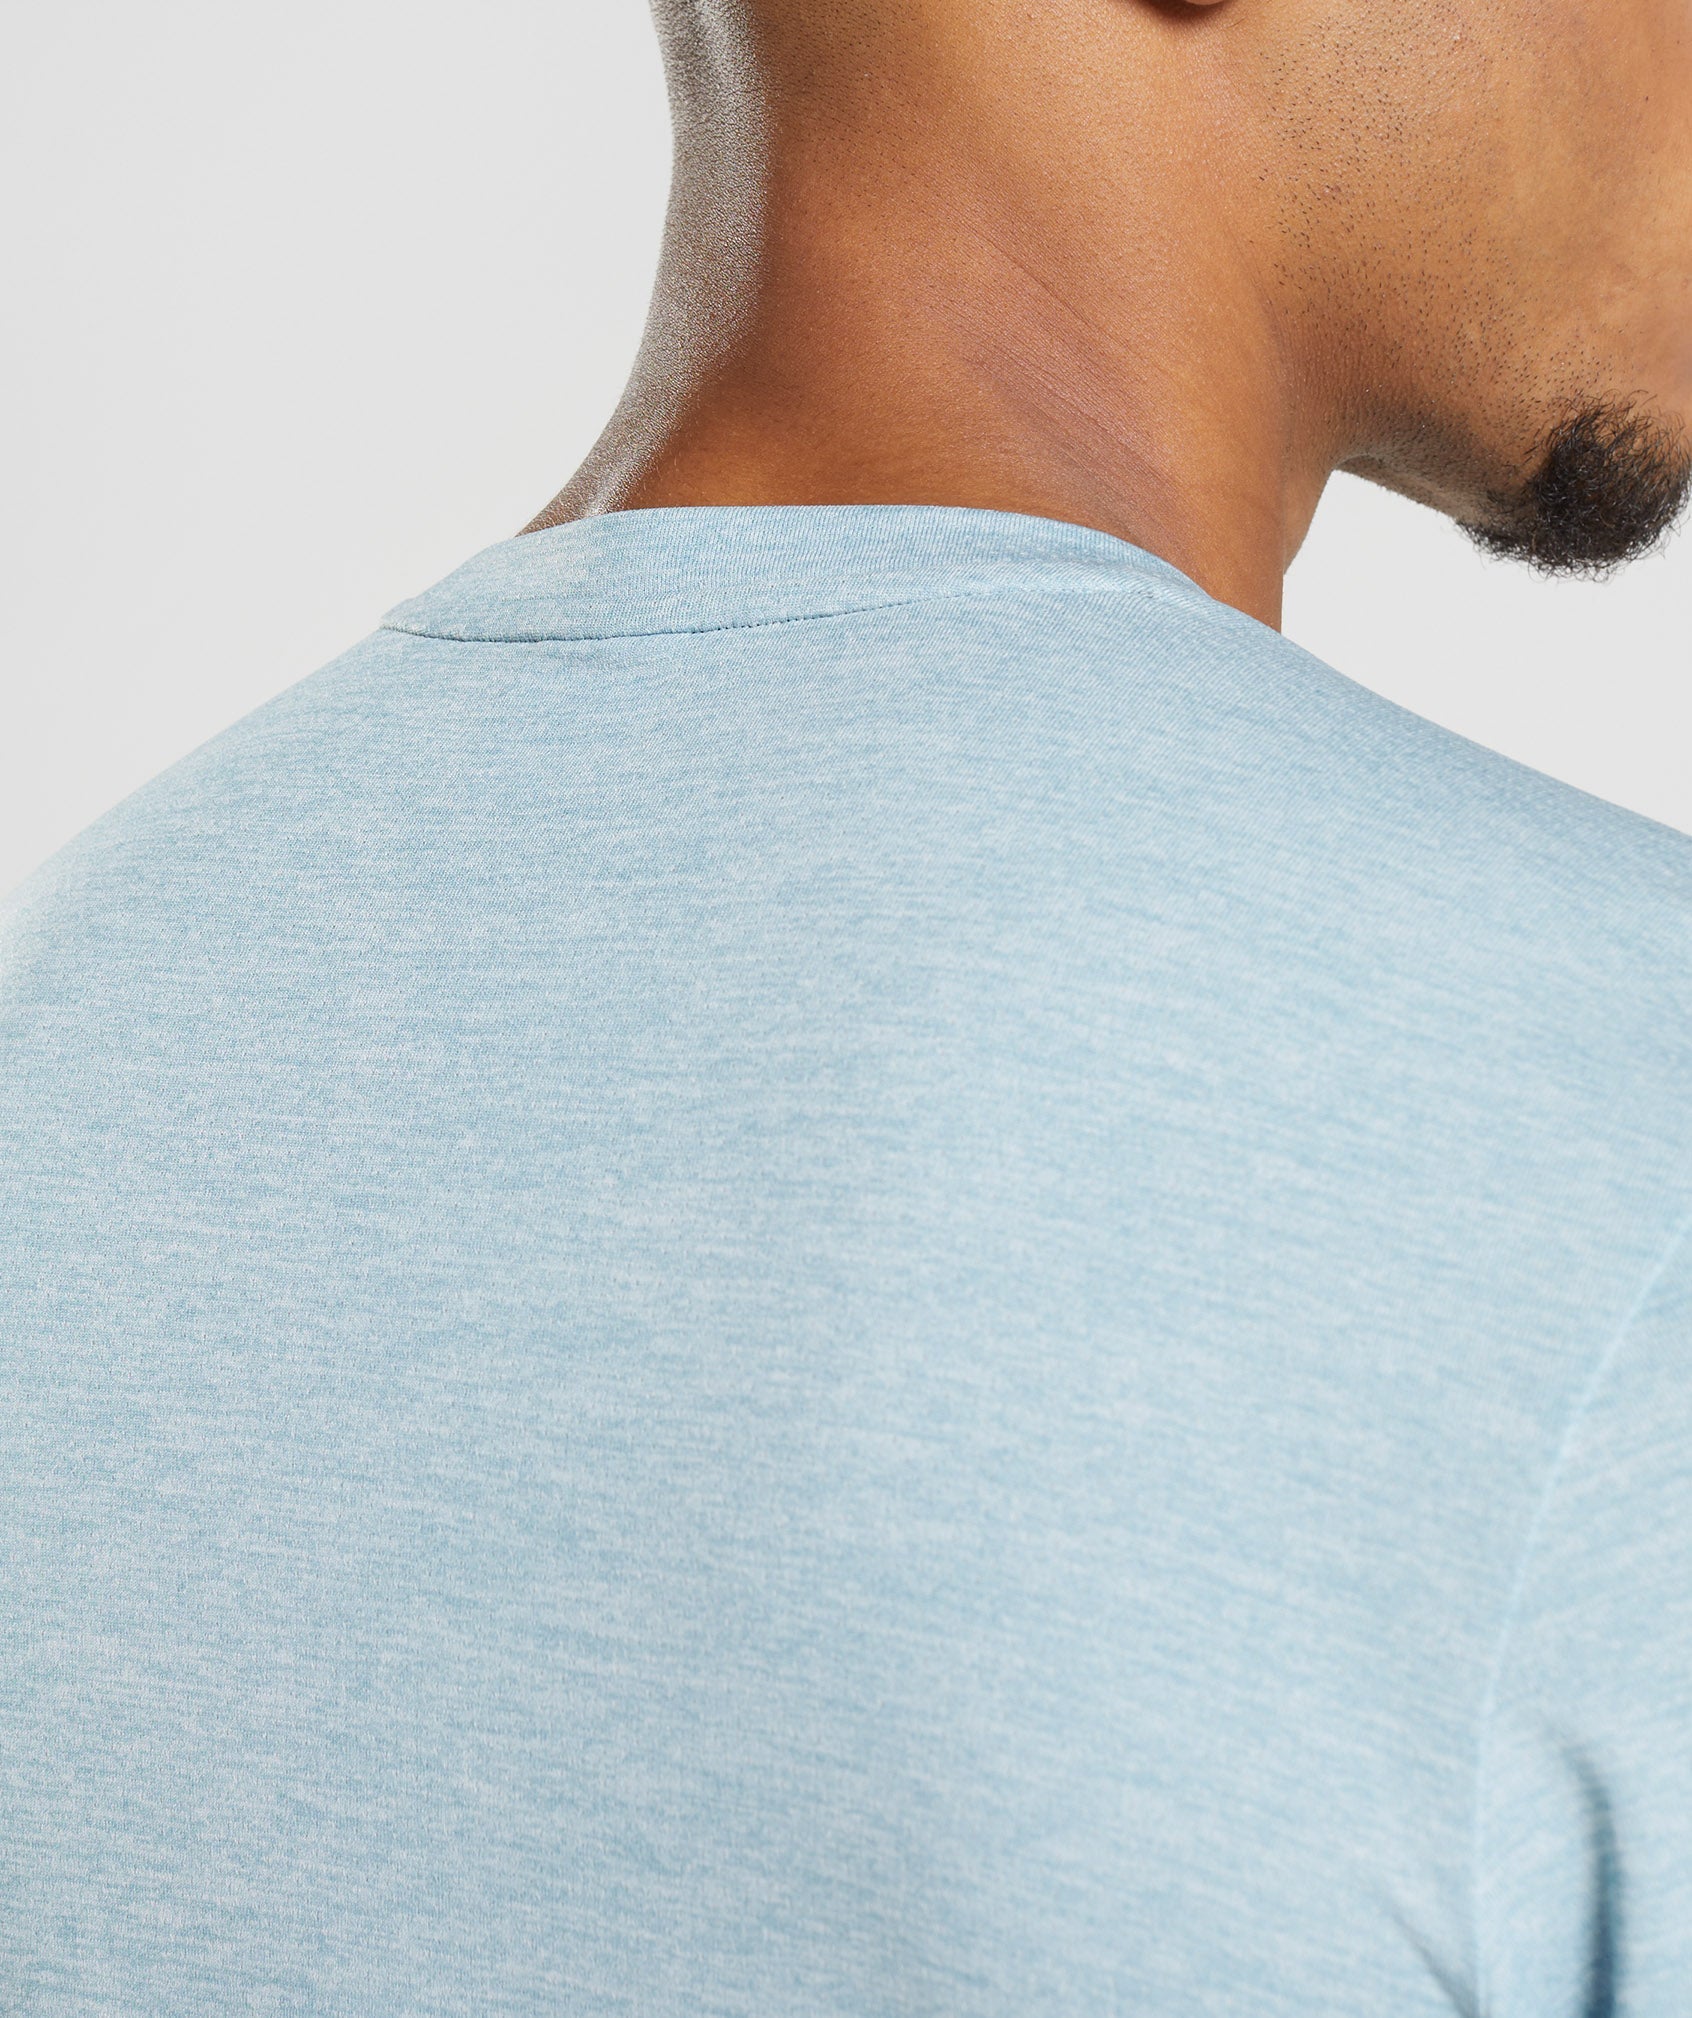 Arrival T-Shirt in Iceberg Blue/Icy Blue Marl